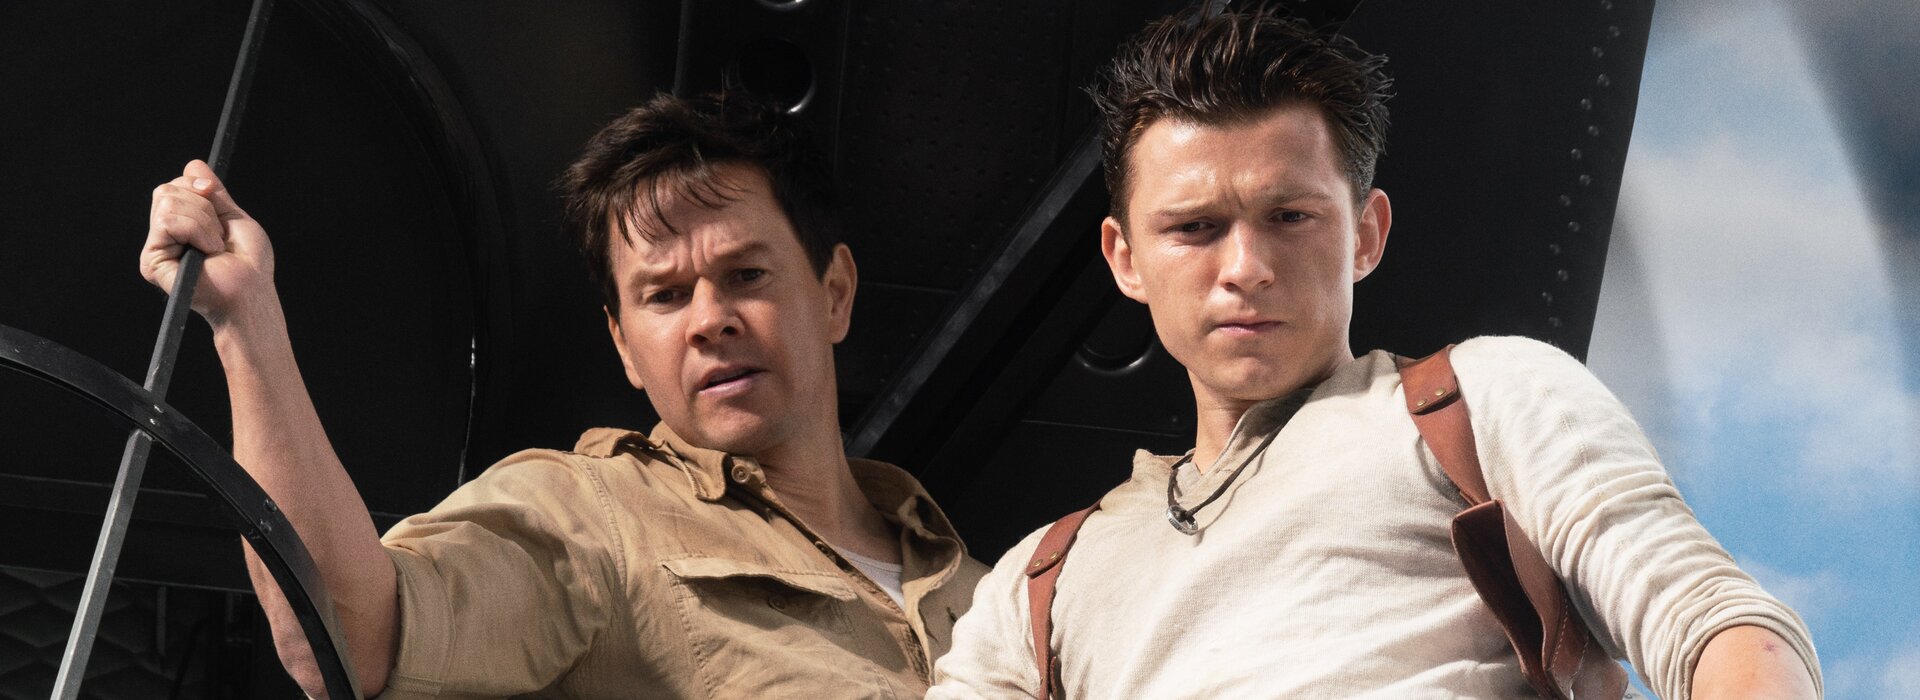 Kino-Tipps: Tom Holland in "Uncharted" und Doku "The Alpinist"